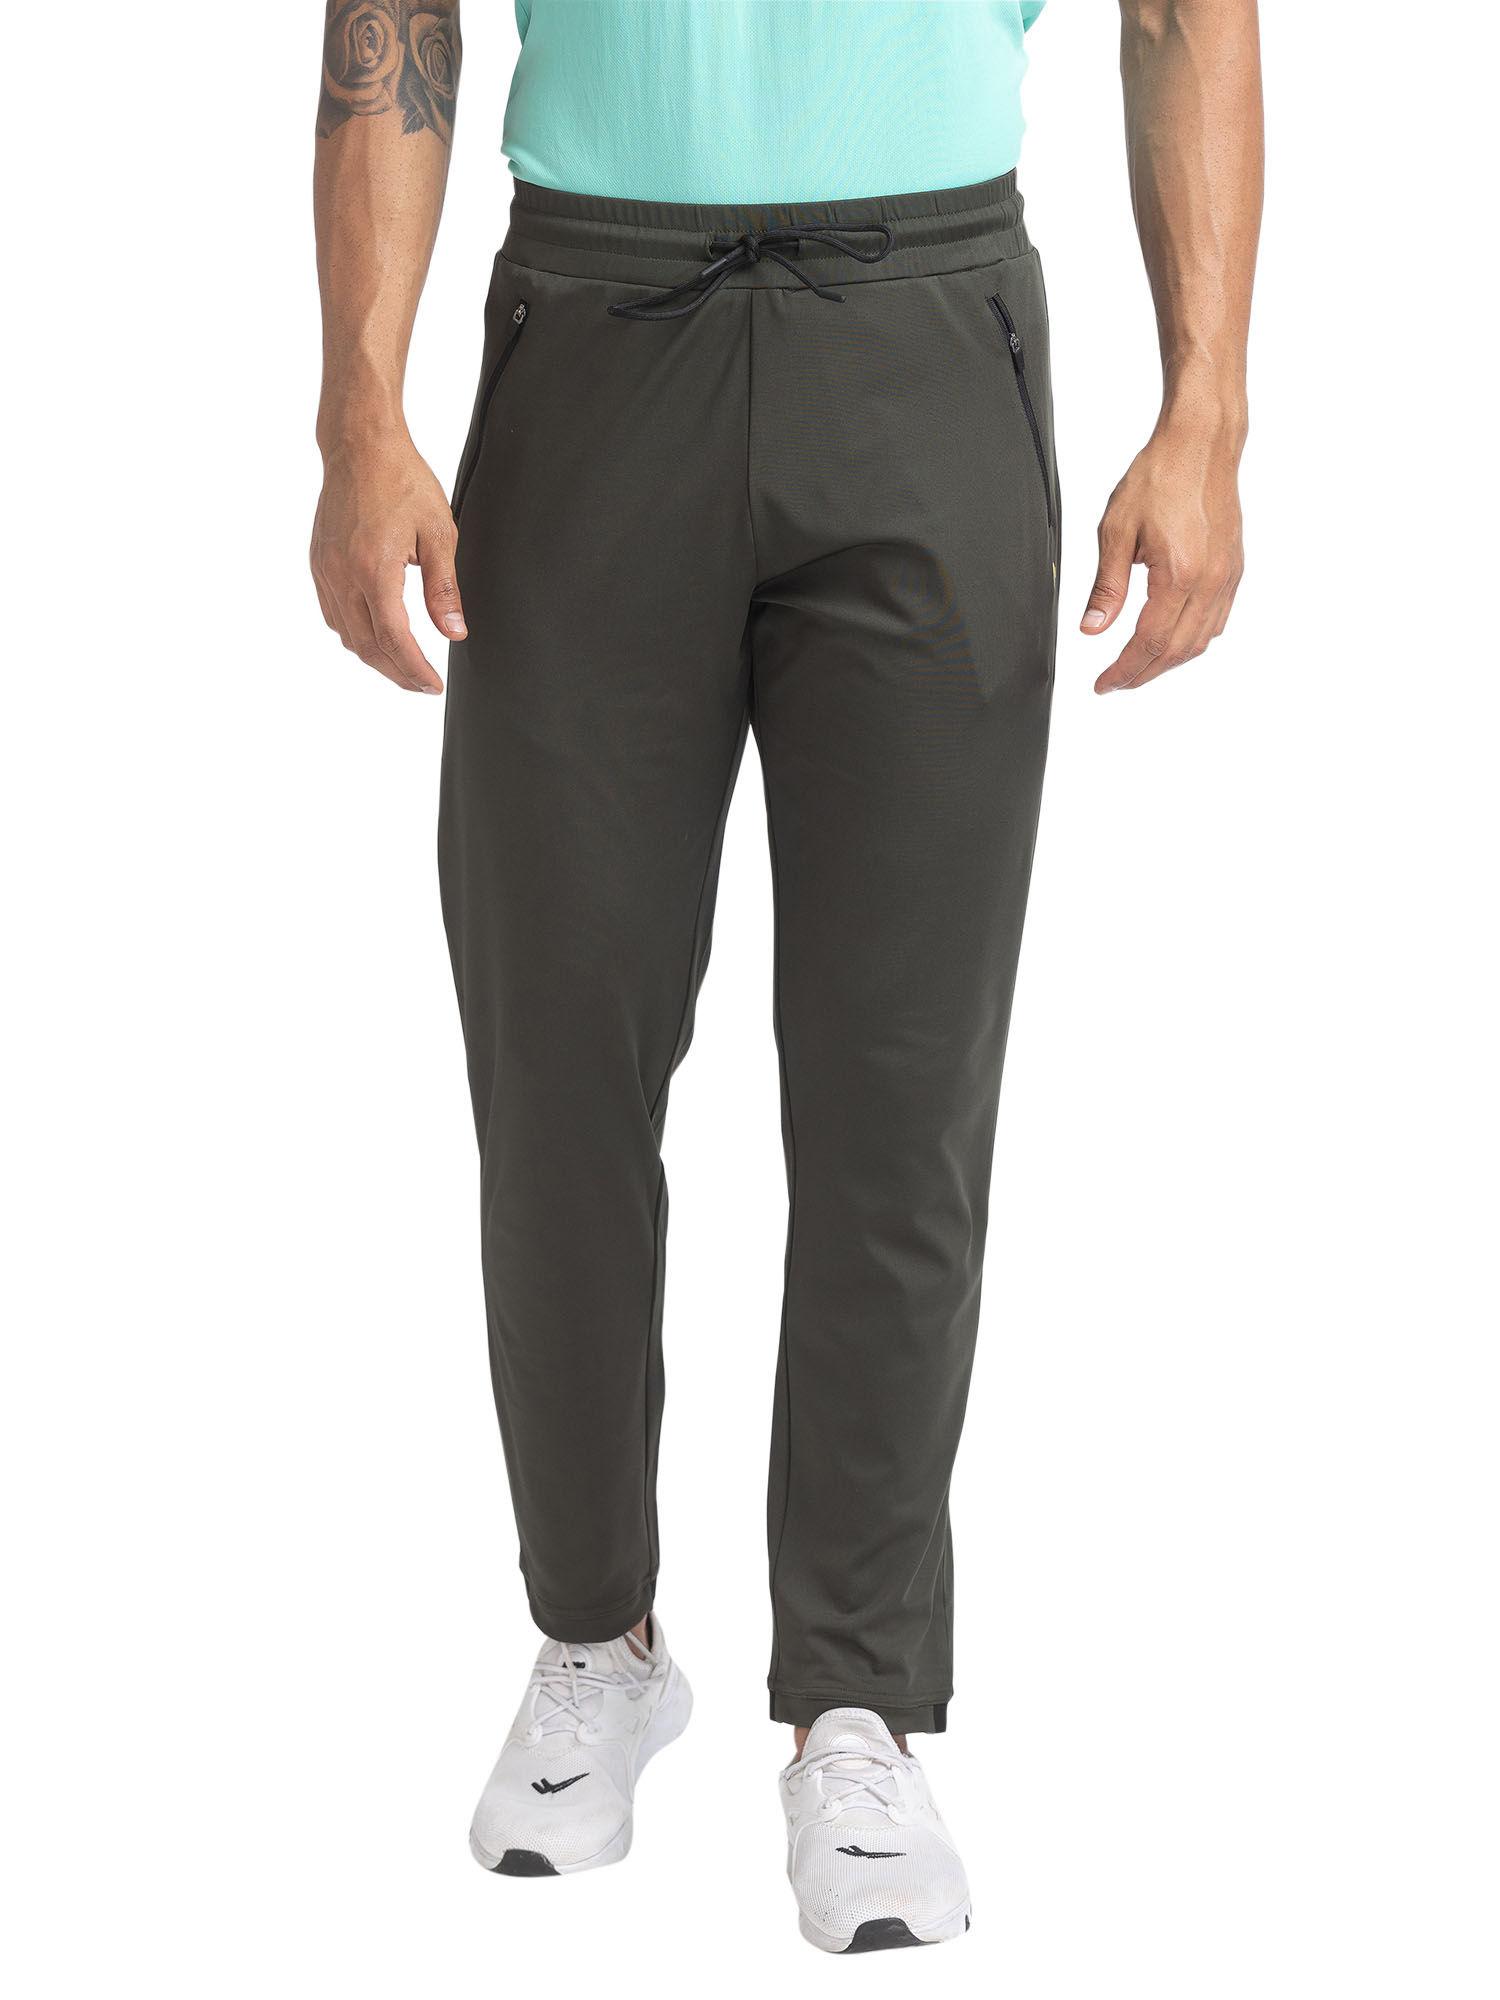 joggers fit solid dark green track pant